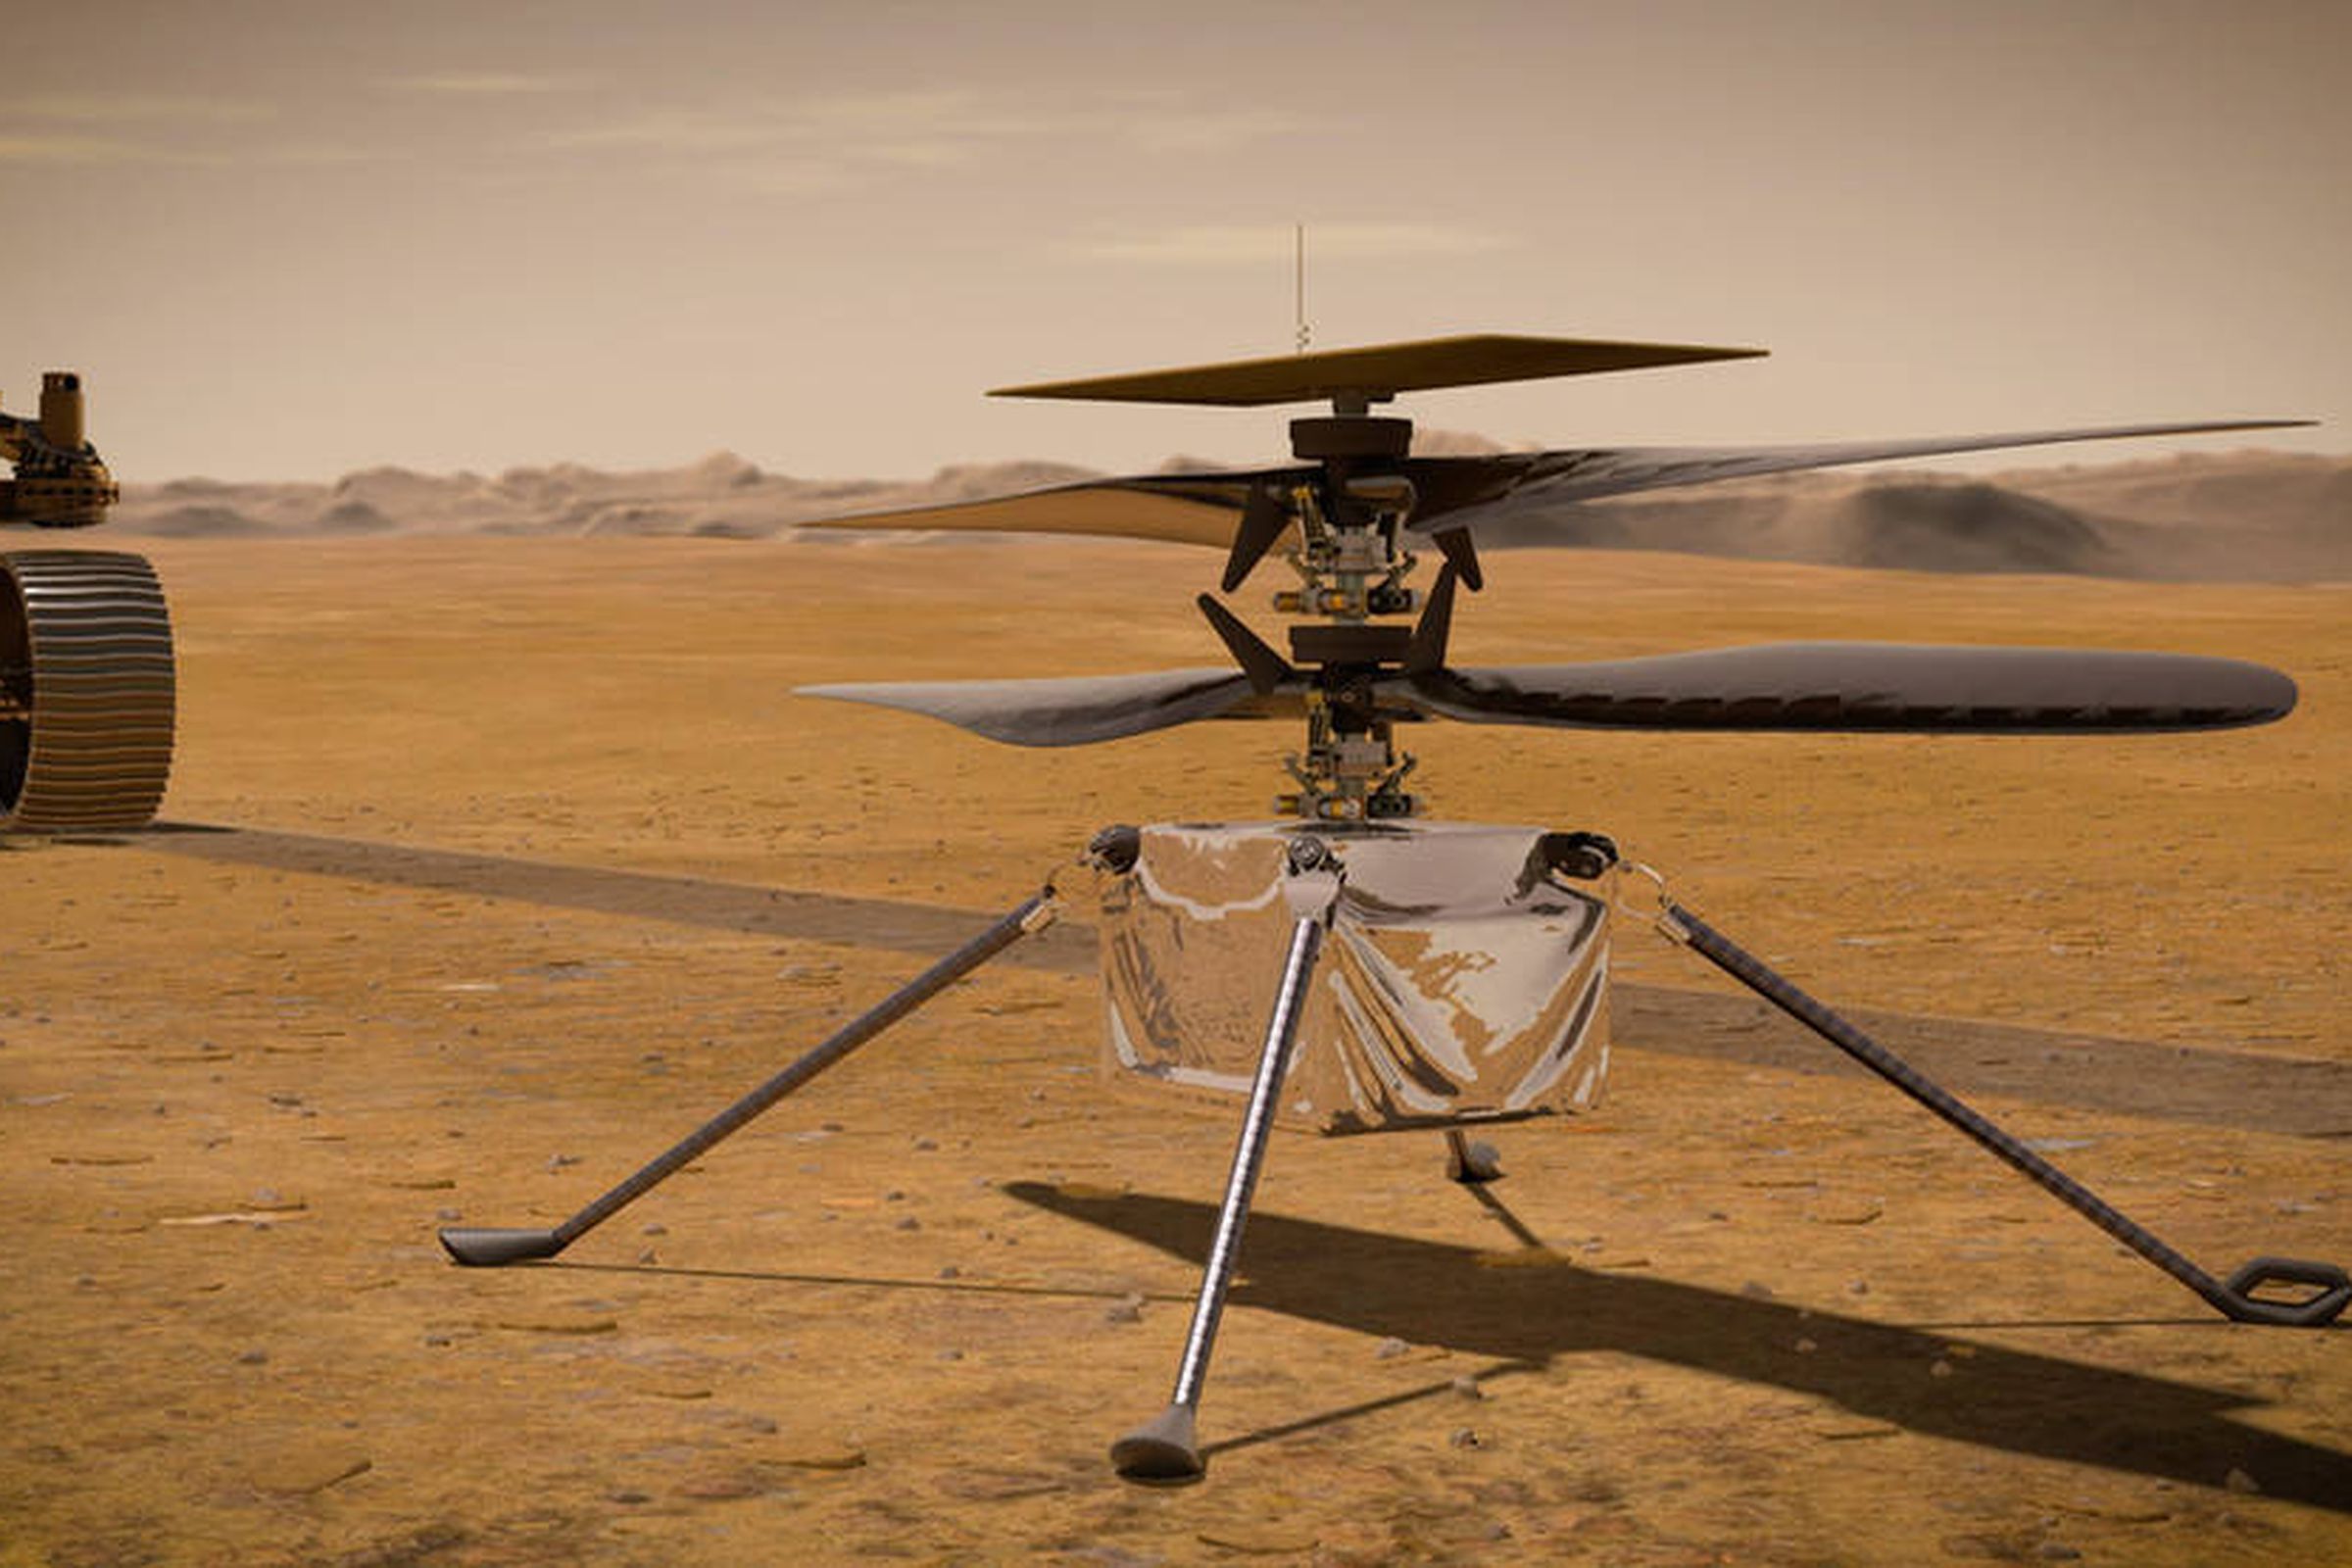 NASA’s Ingenuity Mars Helicopter communicates telemetry over Zigbee to the NASA’s Perseverance rover.